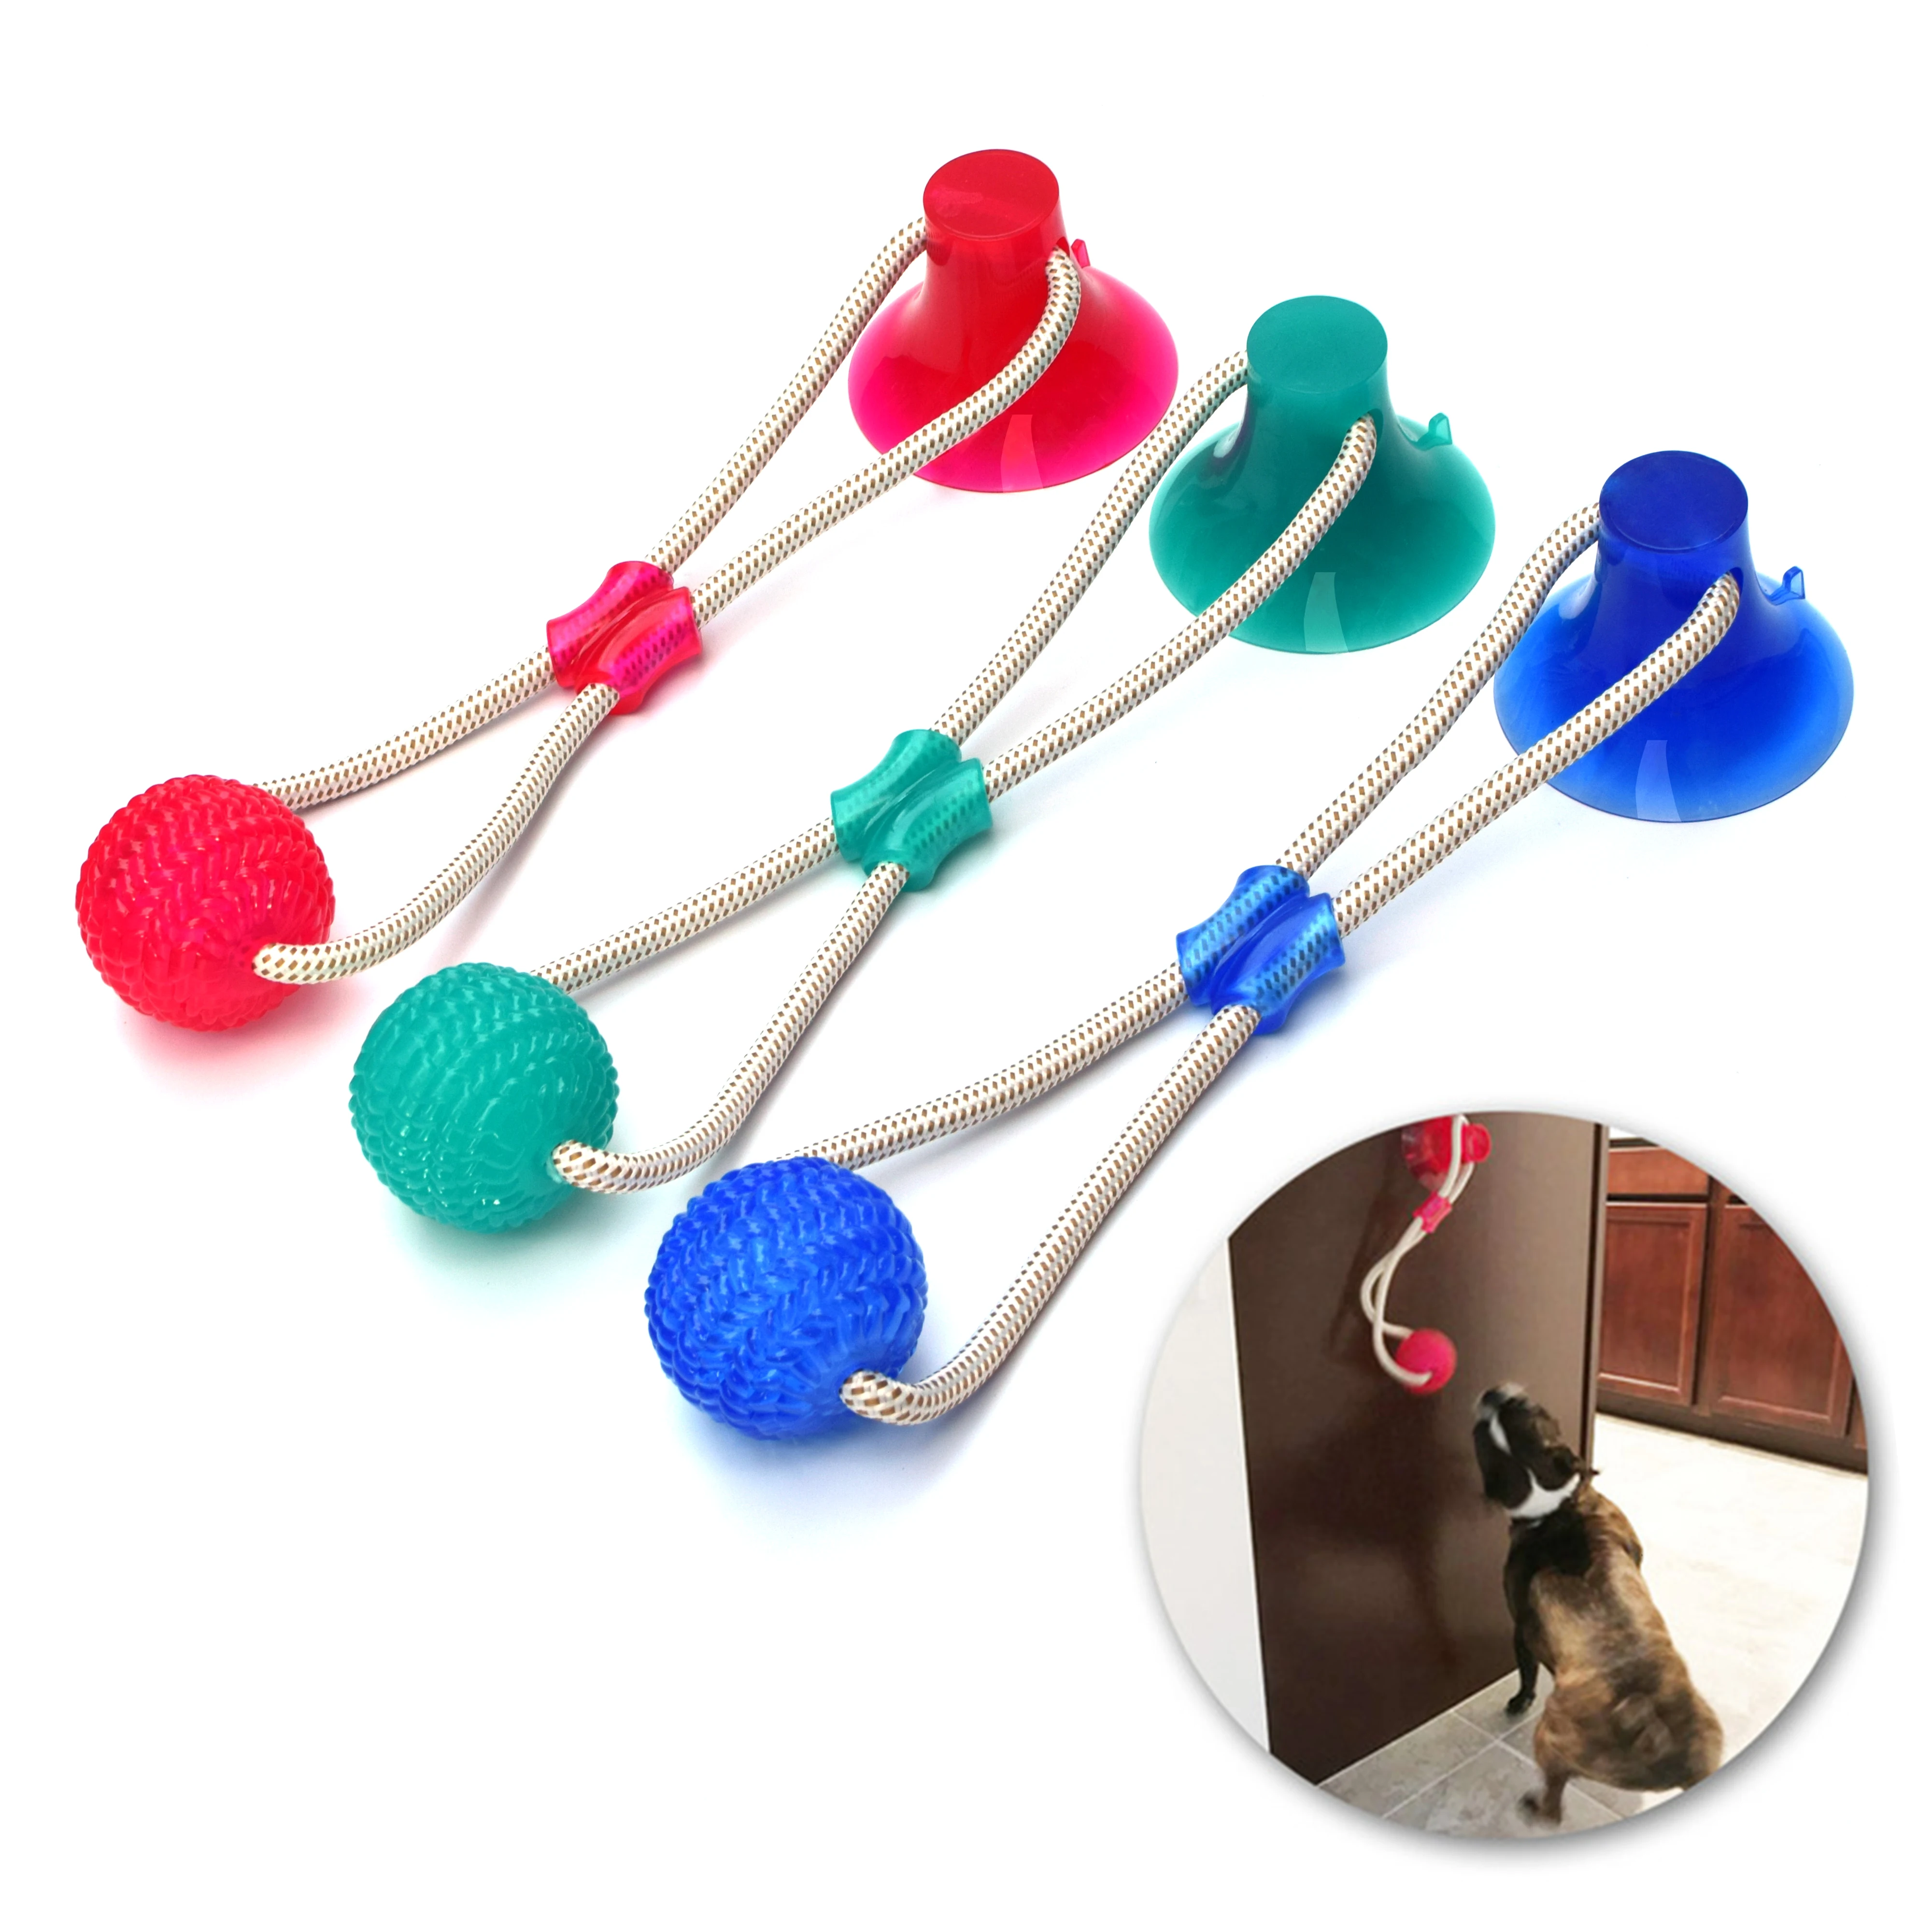 

Multifunction Pet Molar Bite Dog Toys Rubber Chew Ball Cleaning Teeth Safe Elasticity TPR Soft Puppy Suction Cup Biting Dog Toy